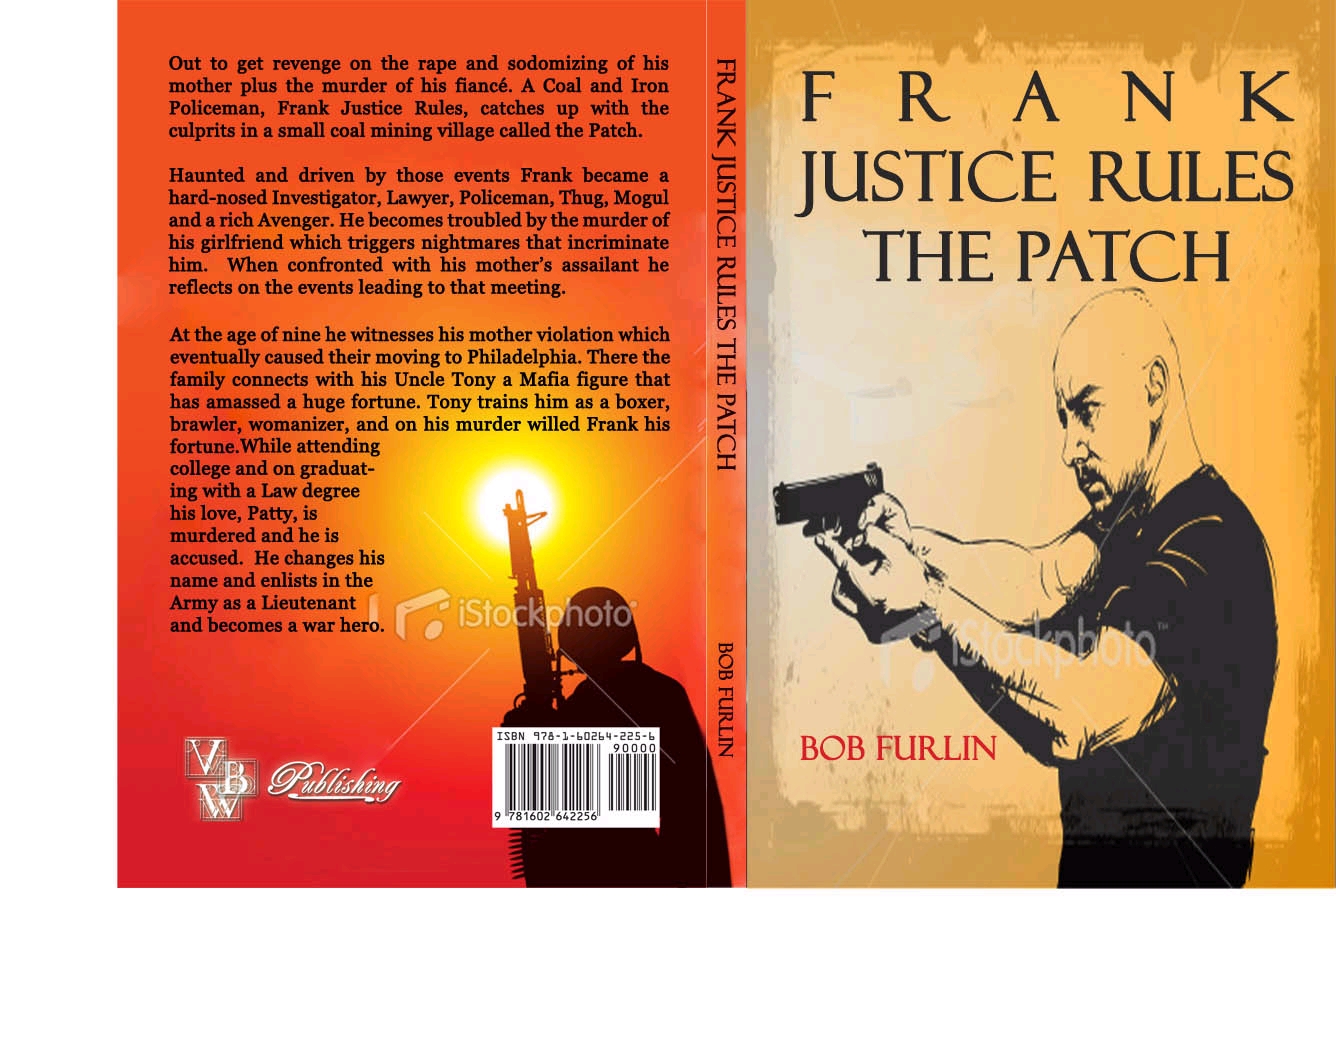 Frank Justice Rules - the Patch